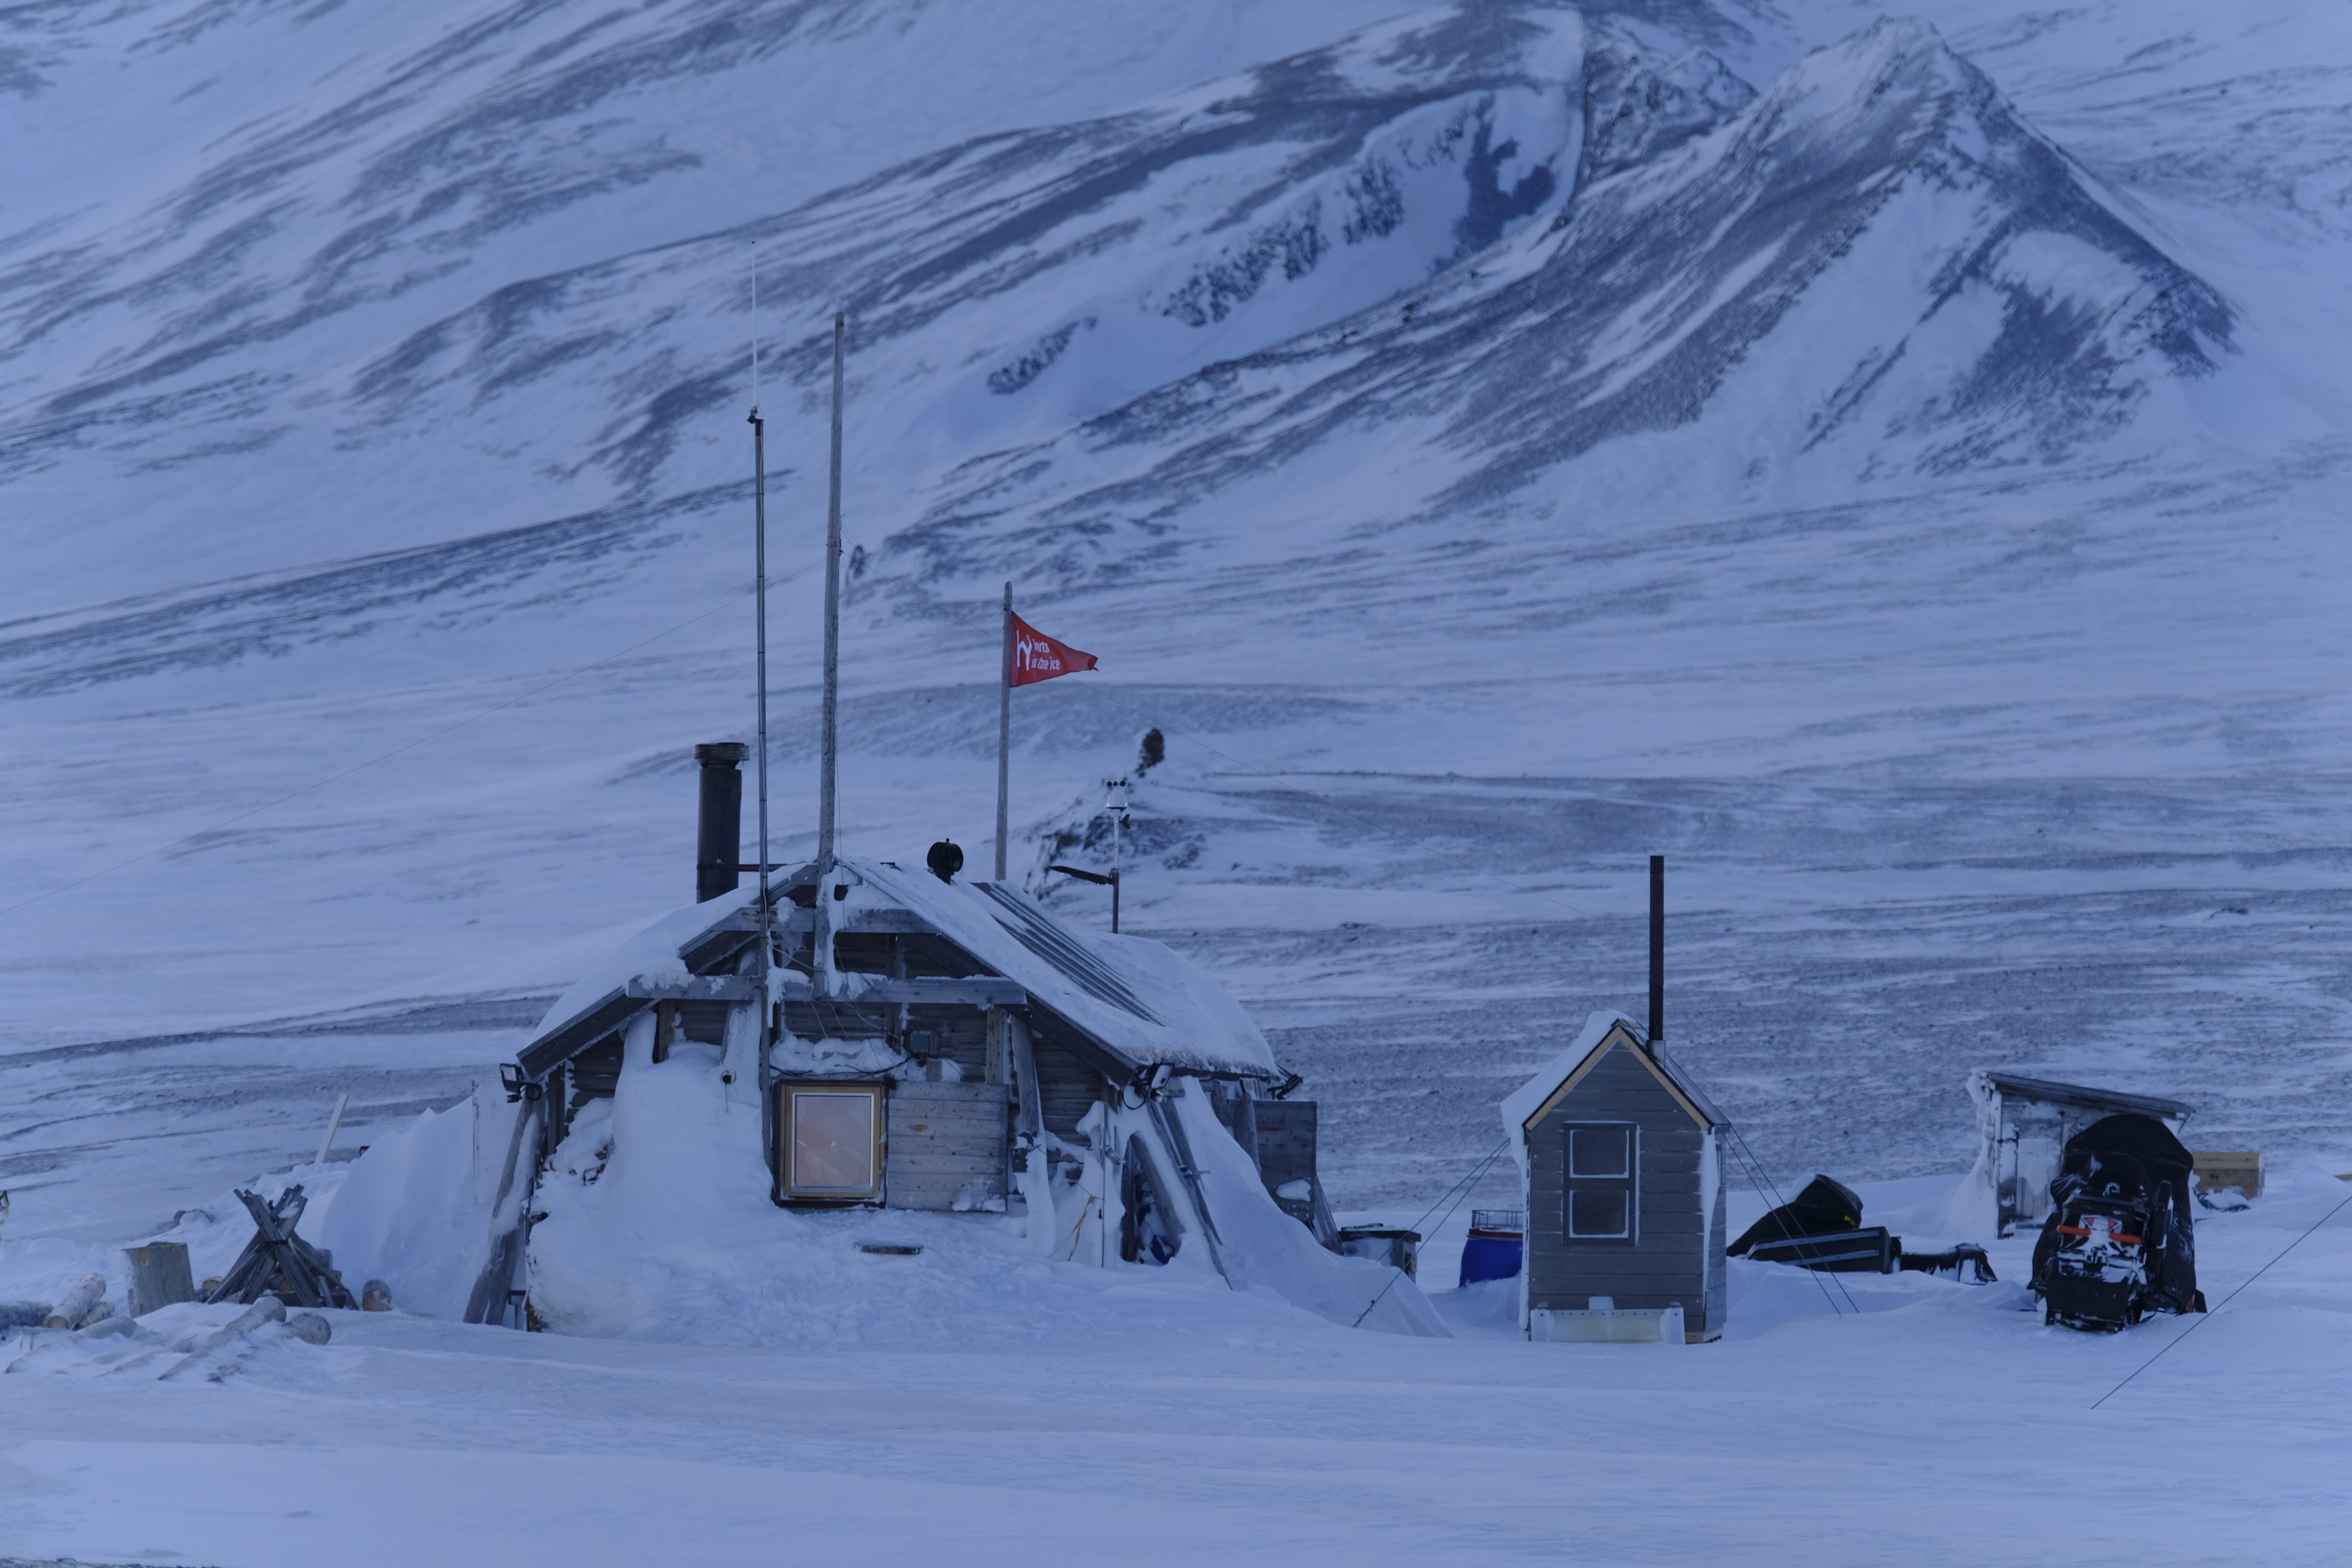 Sunniva Sorby and Hilde Fålun Strøm's cabin in Svalbard, Norway. (Courtesy of Hearts in the Ice)